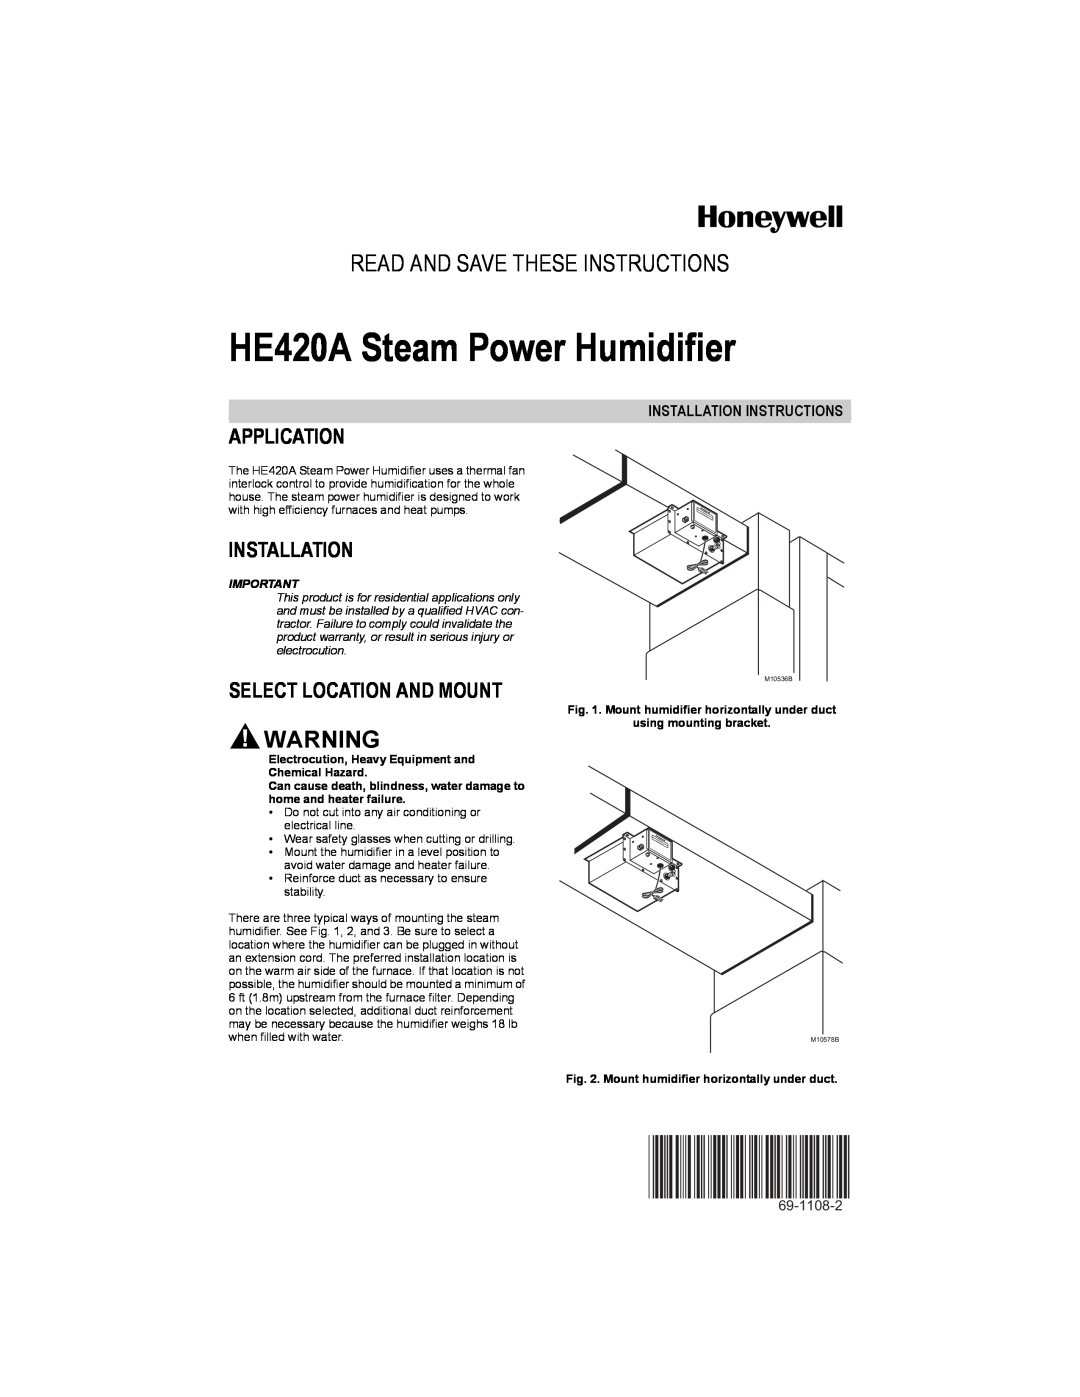 Honeywell HE420A installation instructions Application, Installation, Select Location And Mount, using mounting bracket 